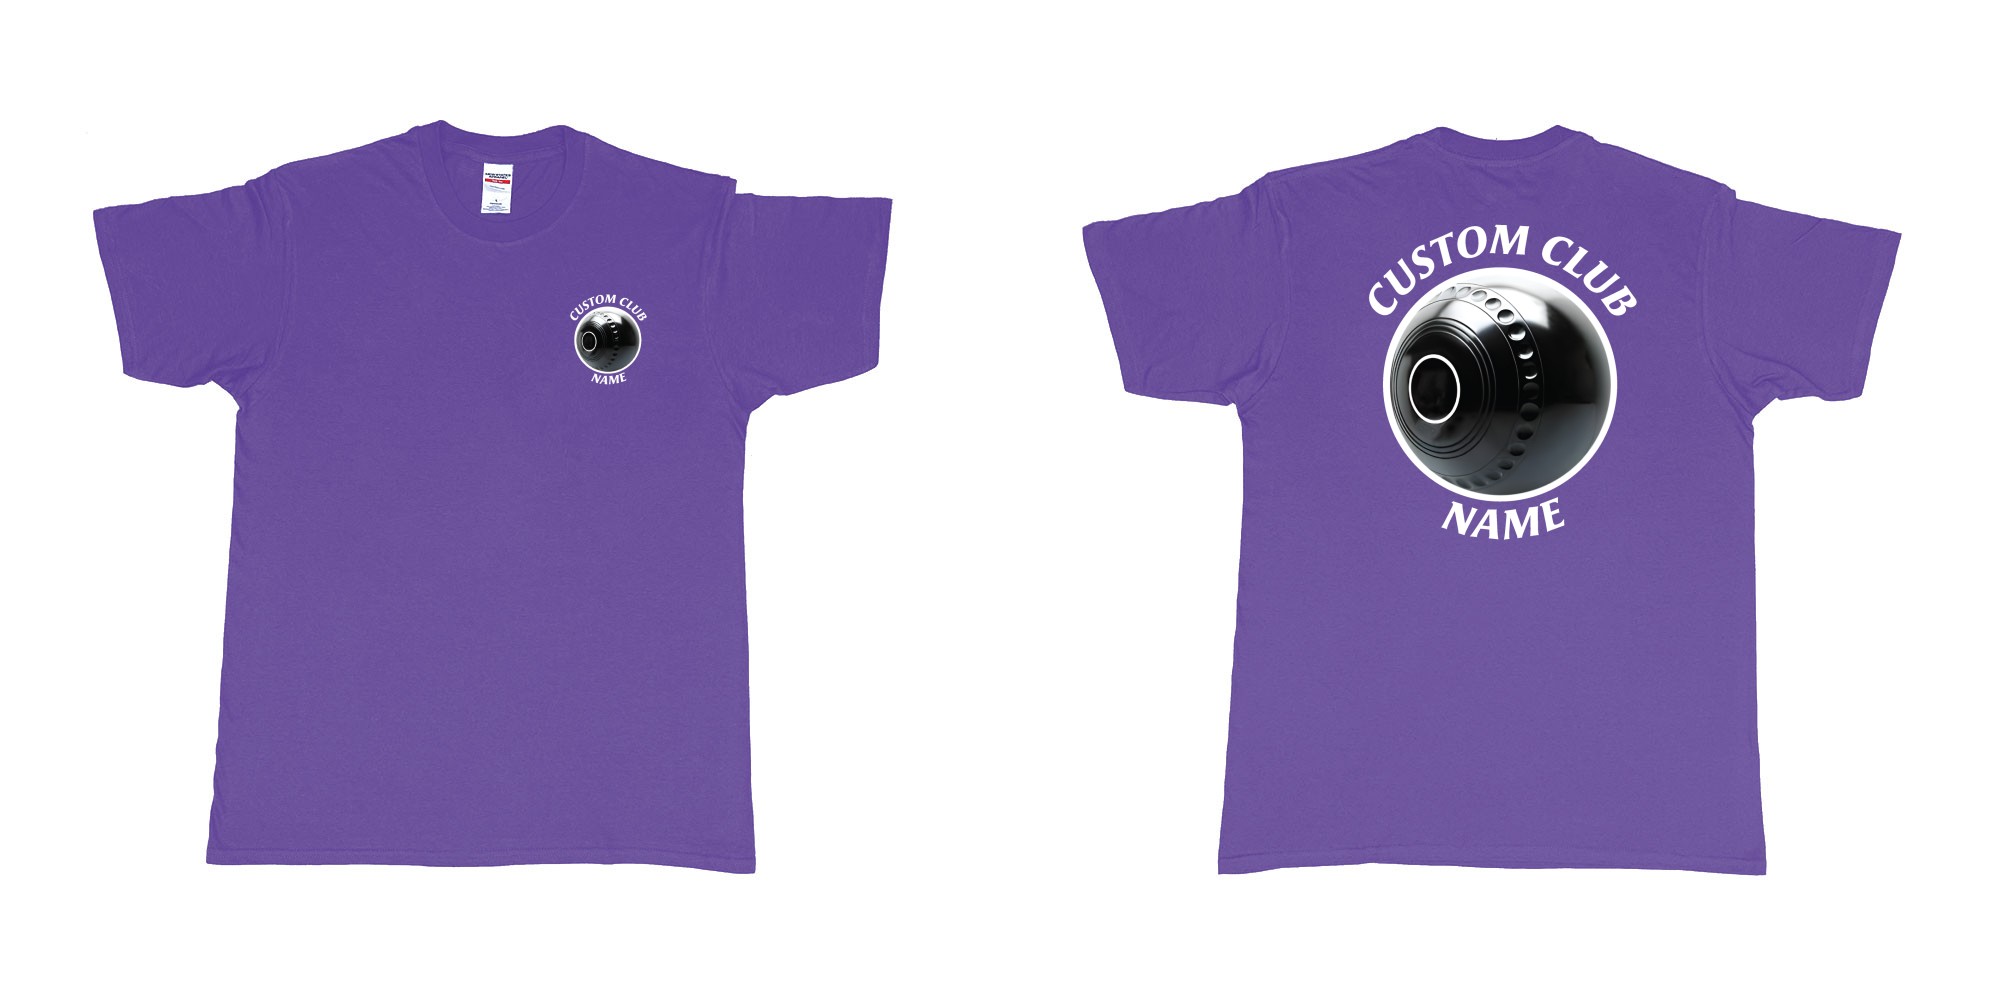 Custom tshirt design bowls lawn bowling custom club name in fabric color purple choice your own text made in Bali by The Pirate Way